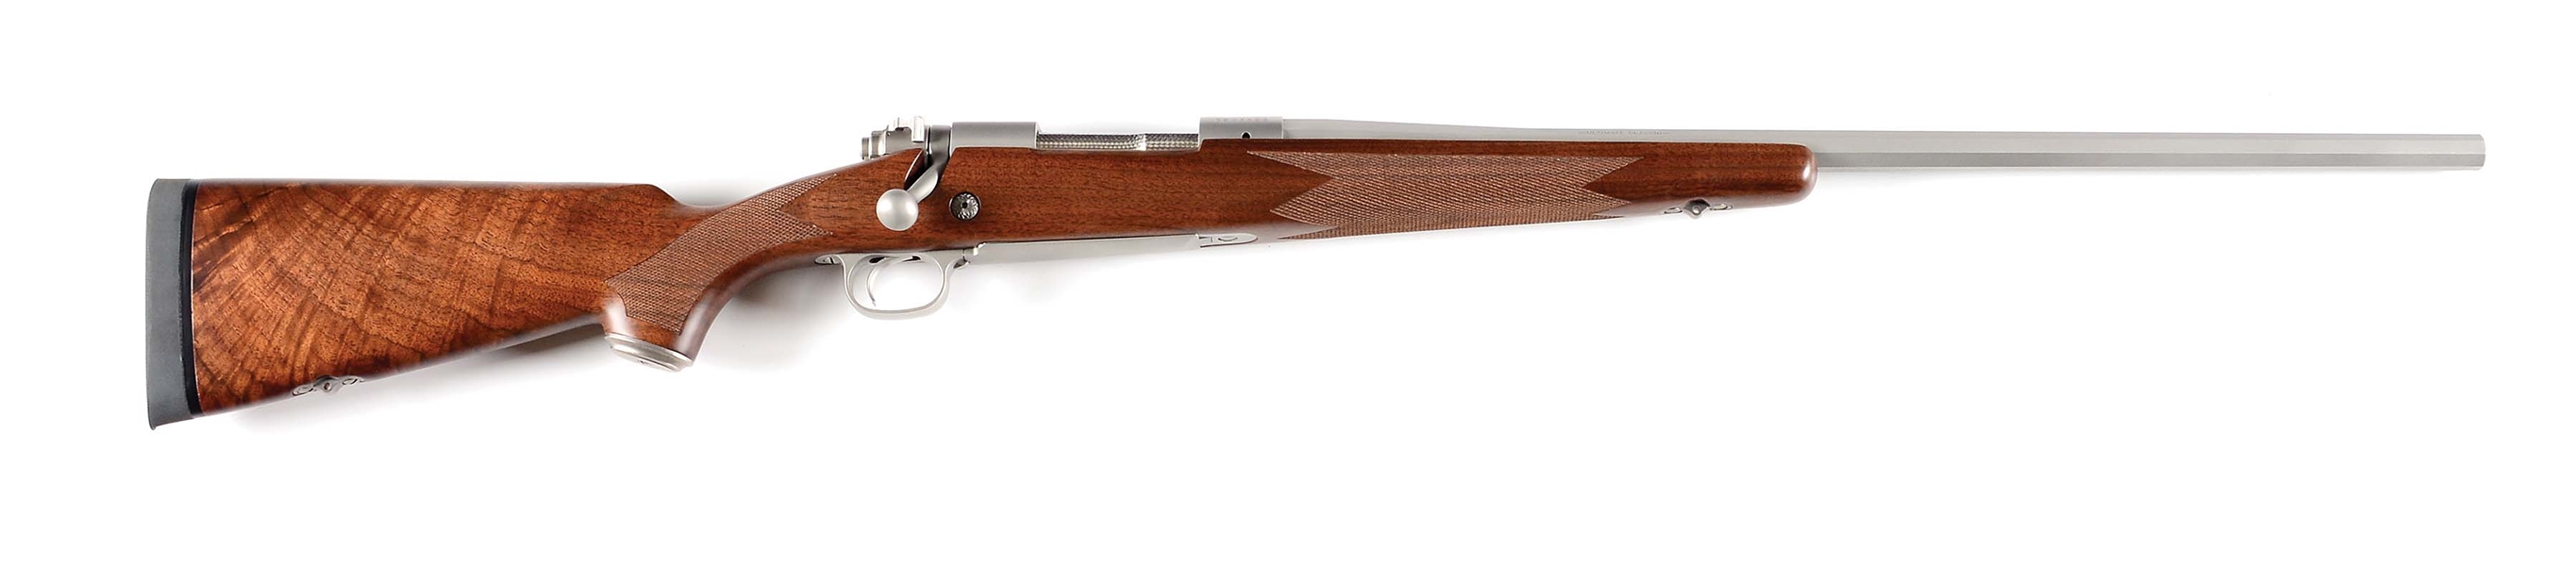 (M) WINCHESTER MODEL 70 ULTIMATE CLASSIC .338-06 BOLT ACTION RIFLE.